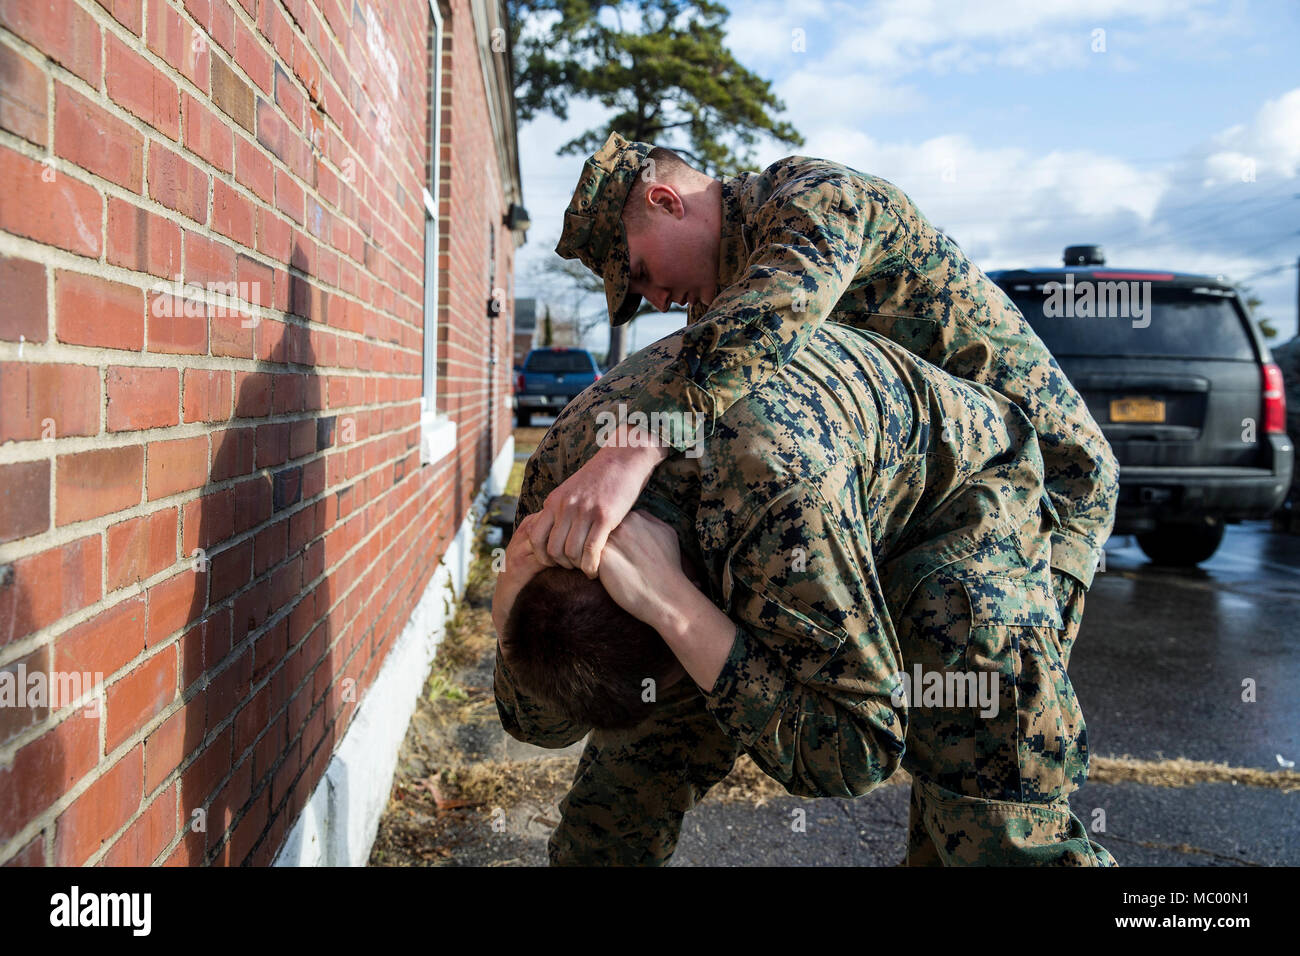 U.S. Marine Lance Cpl. Conor D. Scovill, right, a rifleman with Battalion Landing Team, 2nd Battalion, 6th Marine Regiment, 26th Marine Expeditionary Unit (MEU), physically searches a simulated suspect during vehicle-borne improvised explosive device (VBIED) training on Camp Lejeune, N.C., Jan. 11, 2018. The course was held to educate Marines on the proper procedures of physically inspecting vehicles and civilians for potential threats while also giving them the opportunity to practice techniques in preparation for the upcoming deployment. (U.S. Marine Corps photo by Lance Cpl. Tojyea G. Matal Stock Photo